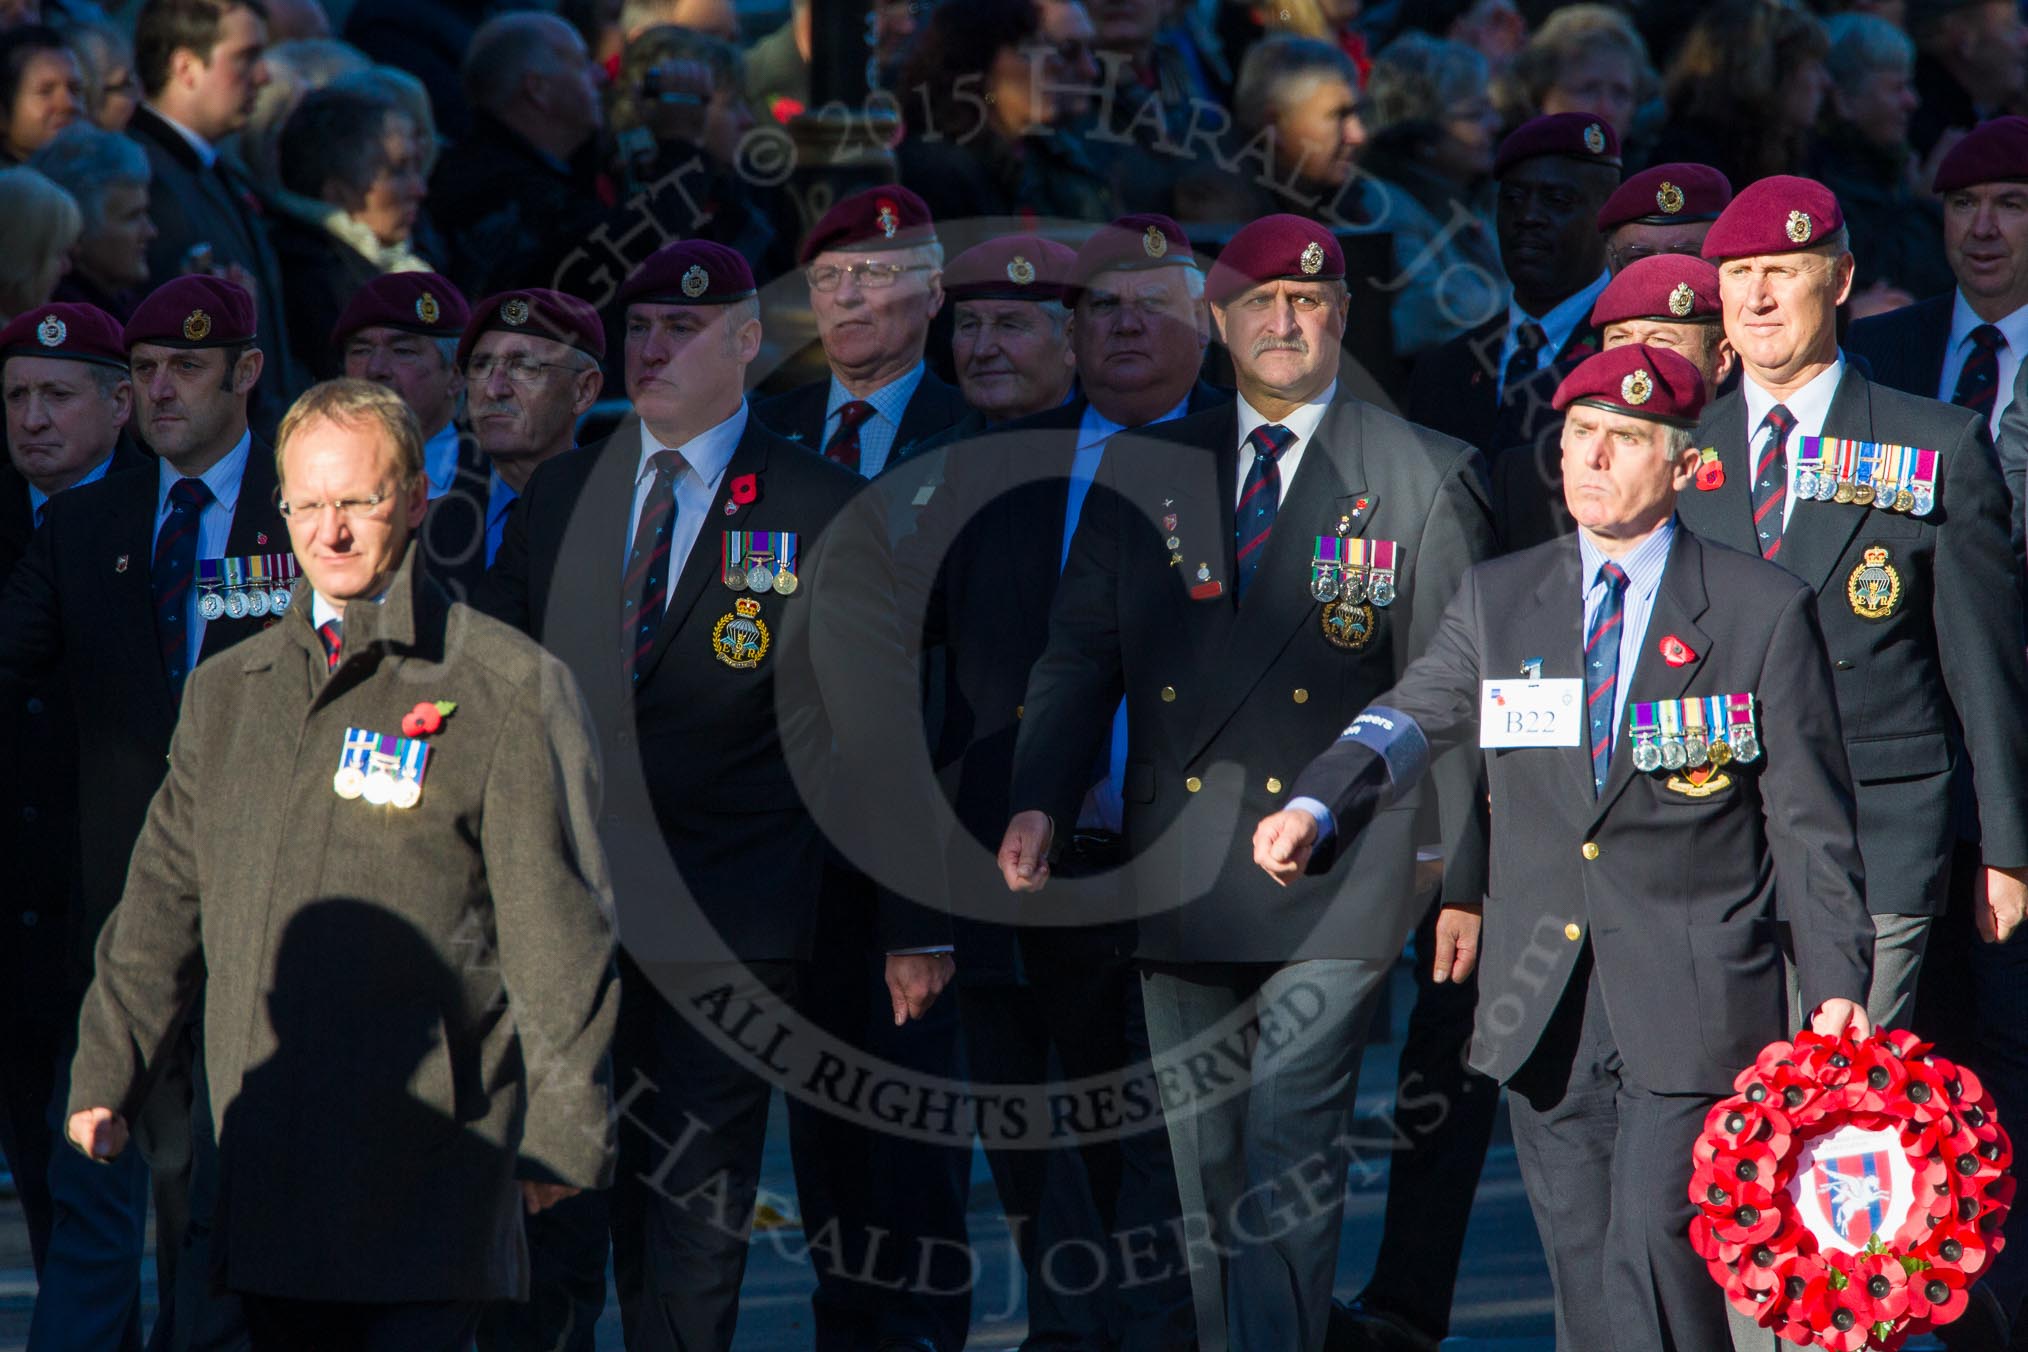 Remembrance Sunday Cenotaph March Past 2013: B22 - Airborne Engineers Association..
Press stand opposite the Foreign Office building, Whitehall, London SW1,
London,
Greater London,
United Kingdom,
on 10 November 2013 at 12:02, image #1482